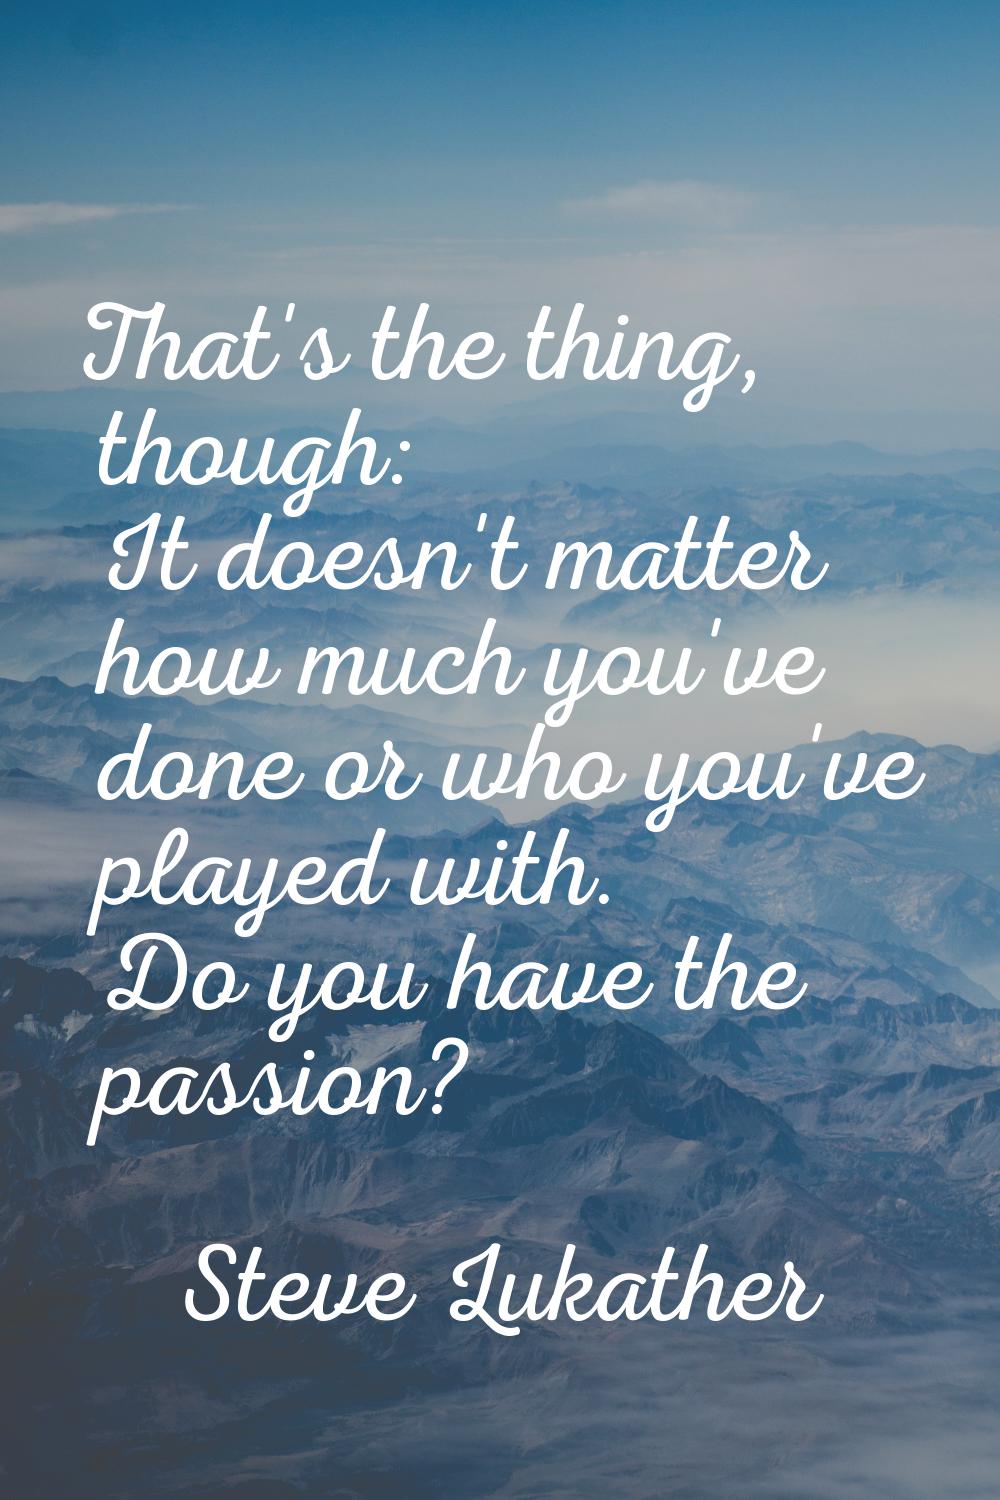 That's the thing, though: It doesn't matter how much you've done or who you've played with. Do you 